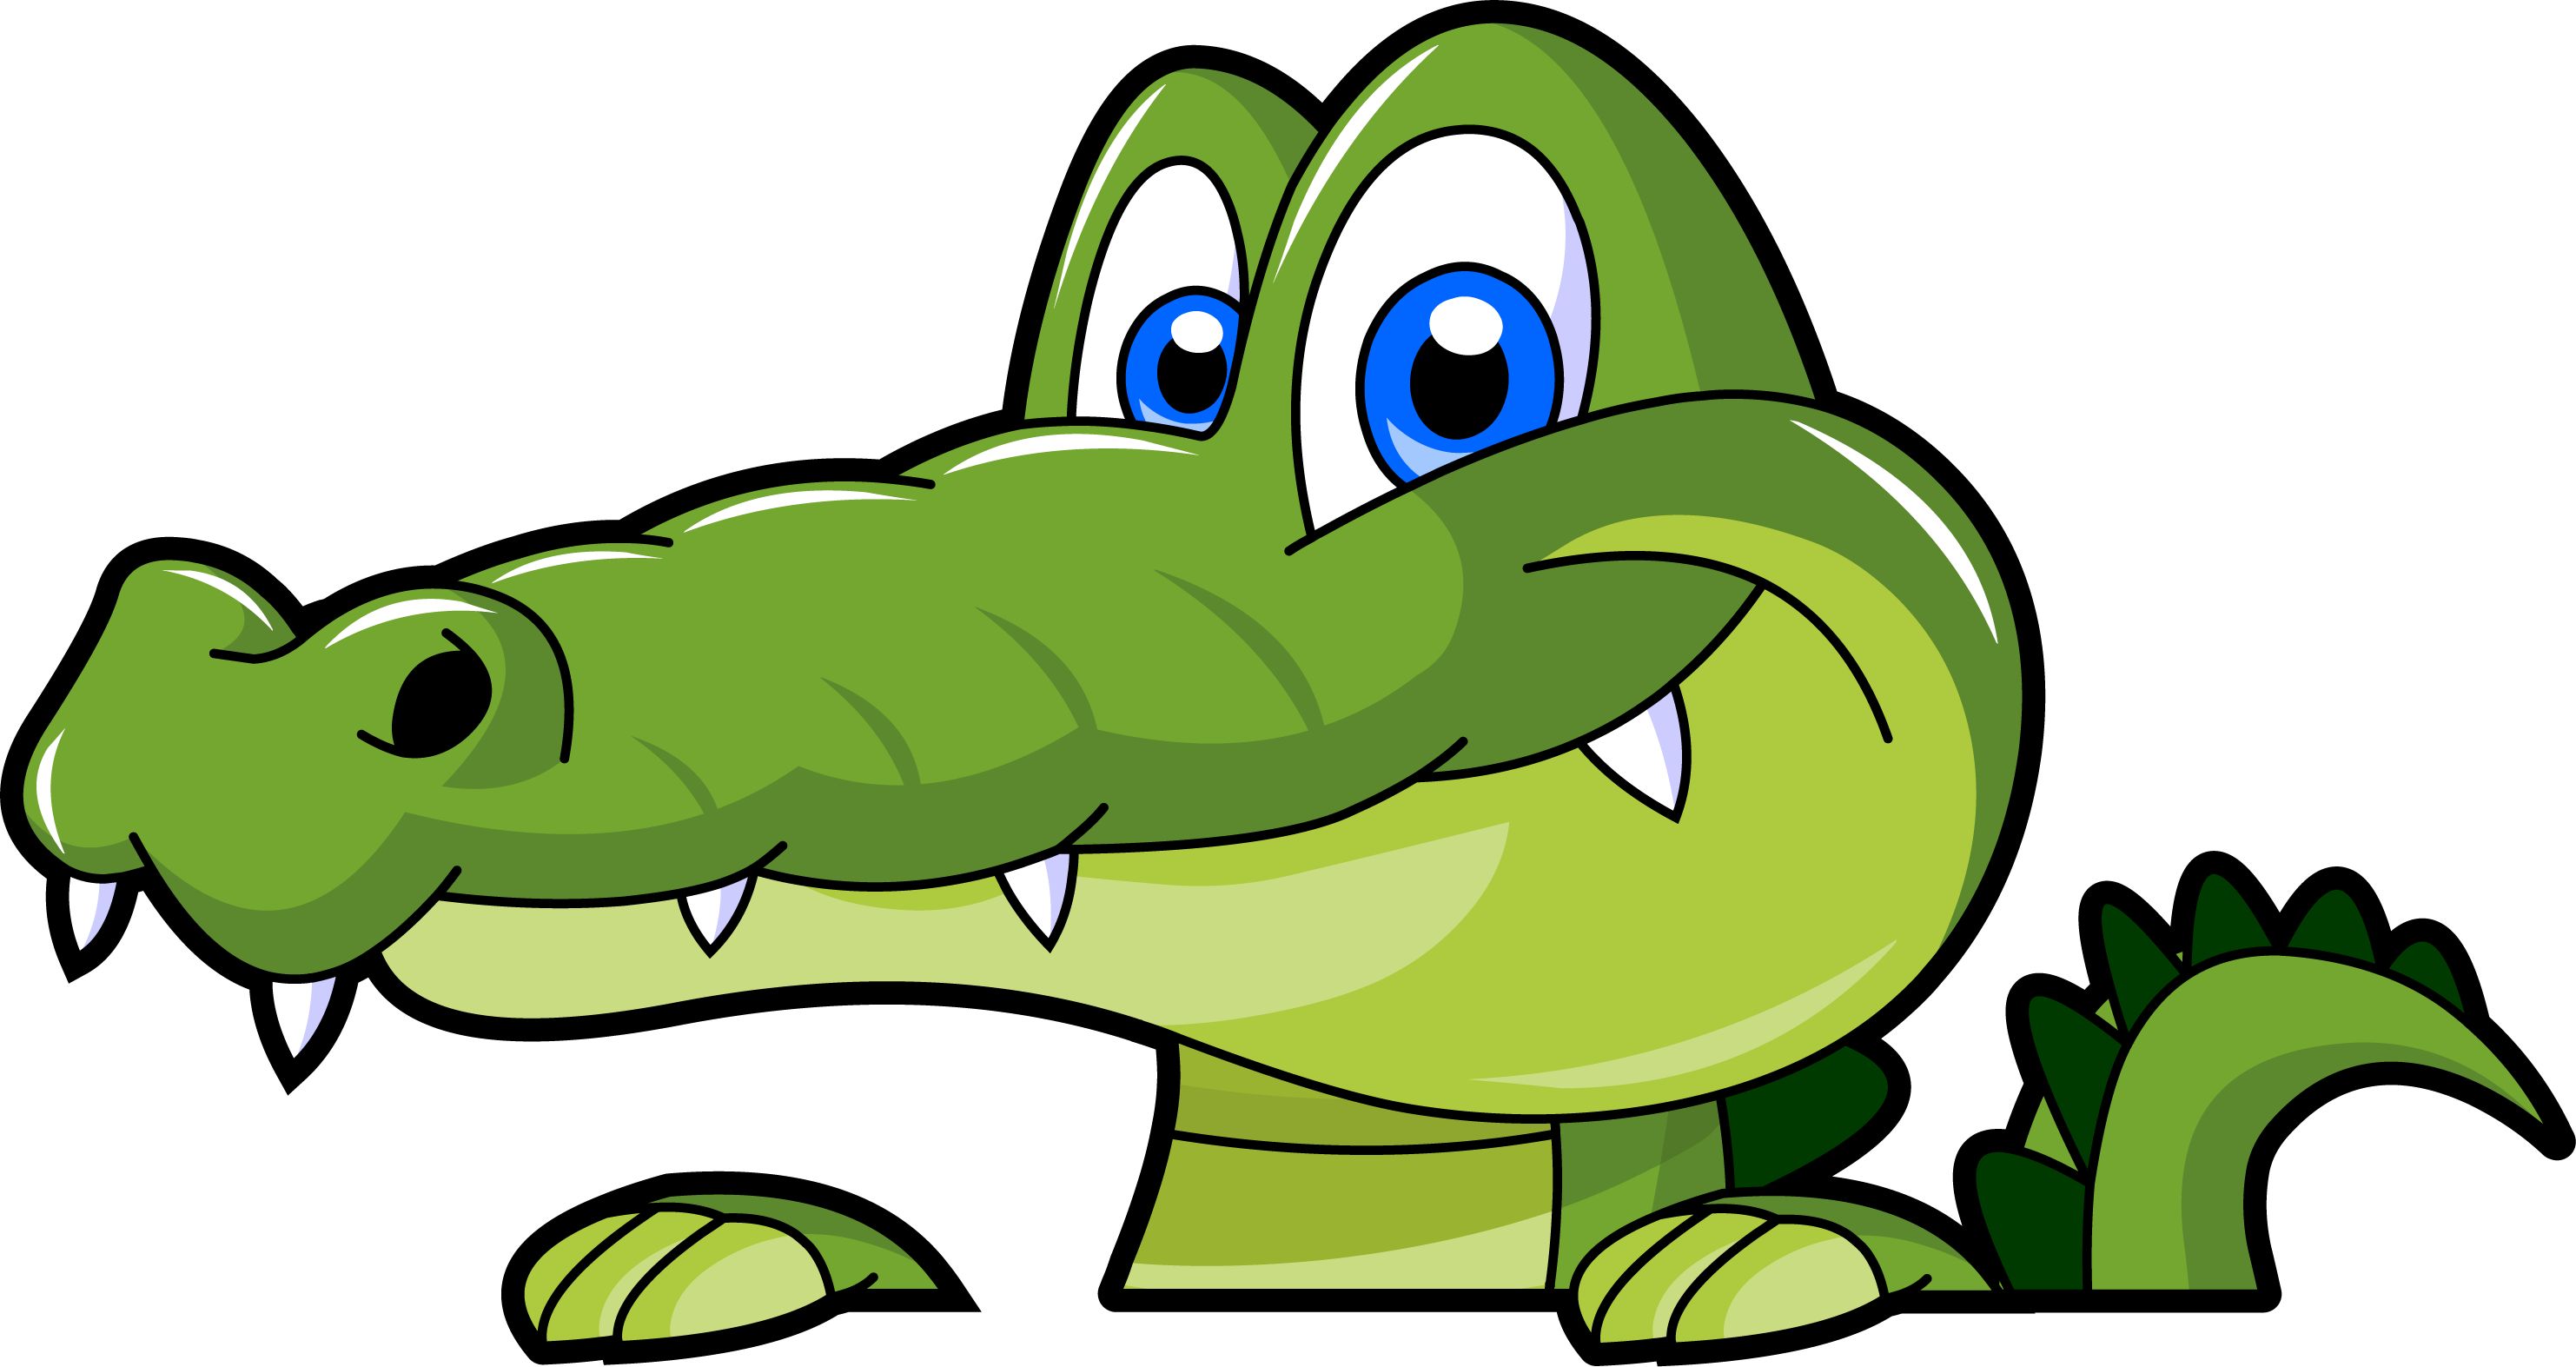 12 Cartoon Alligator Free Cliparts That You Can Download To You